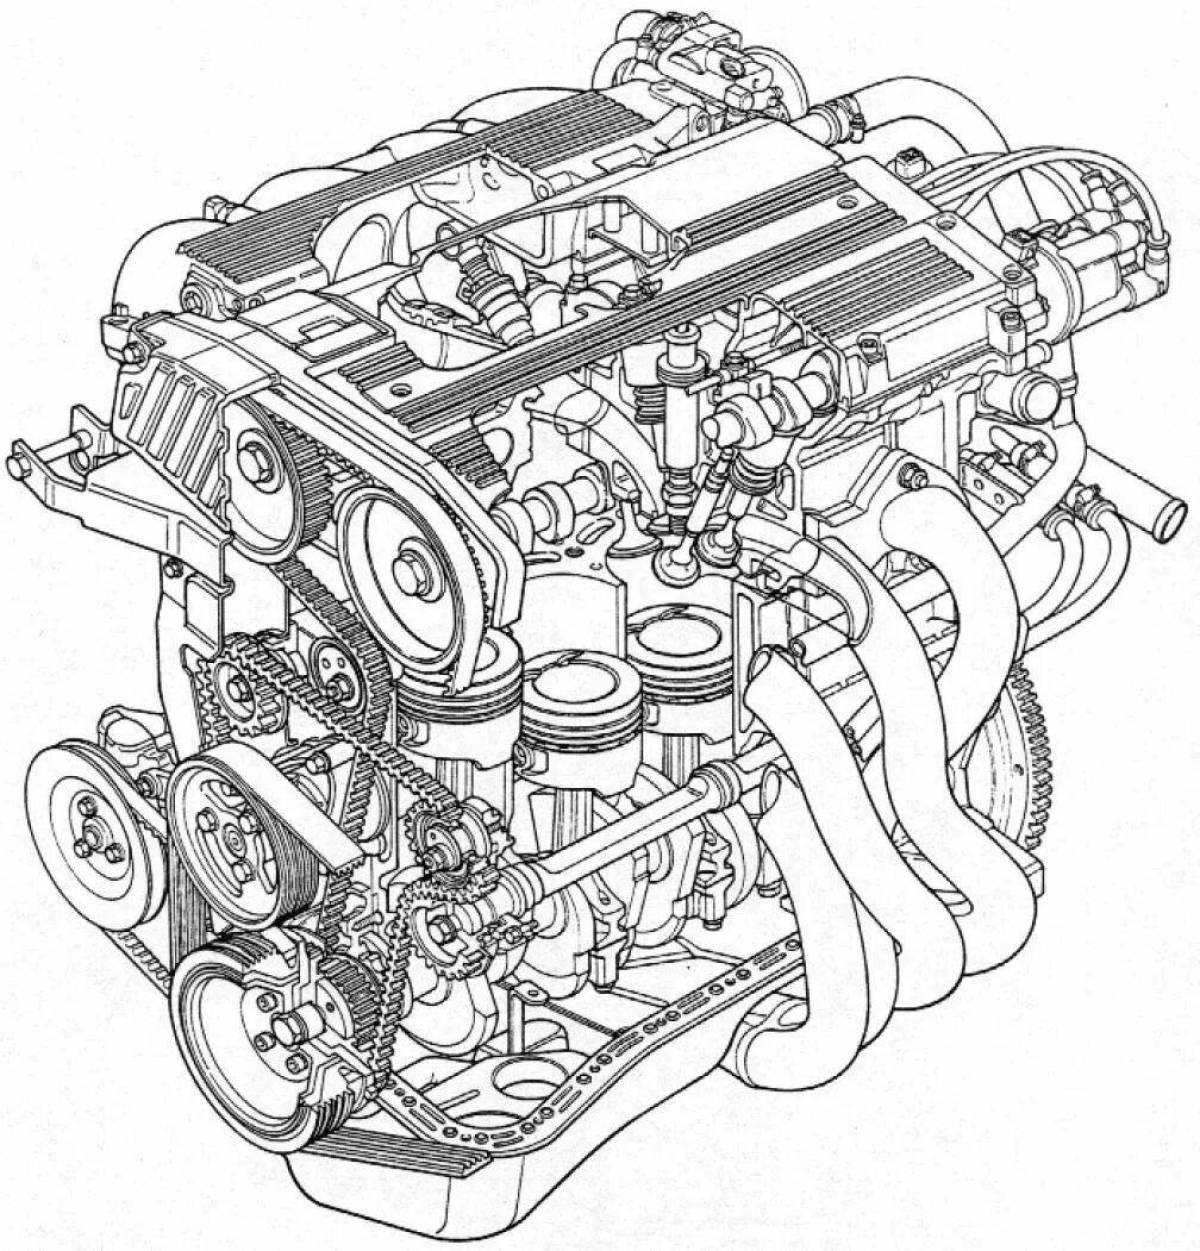 Colorful engine coloring page